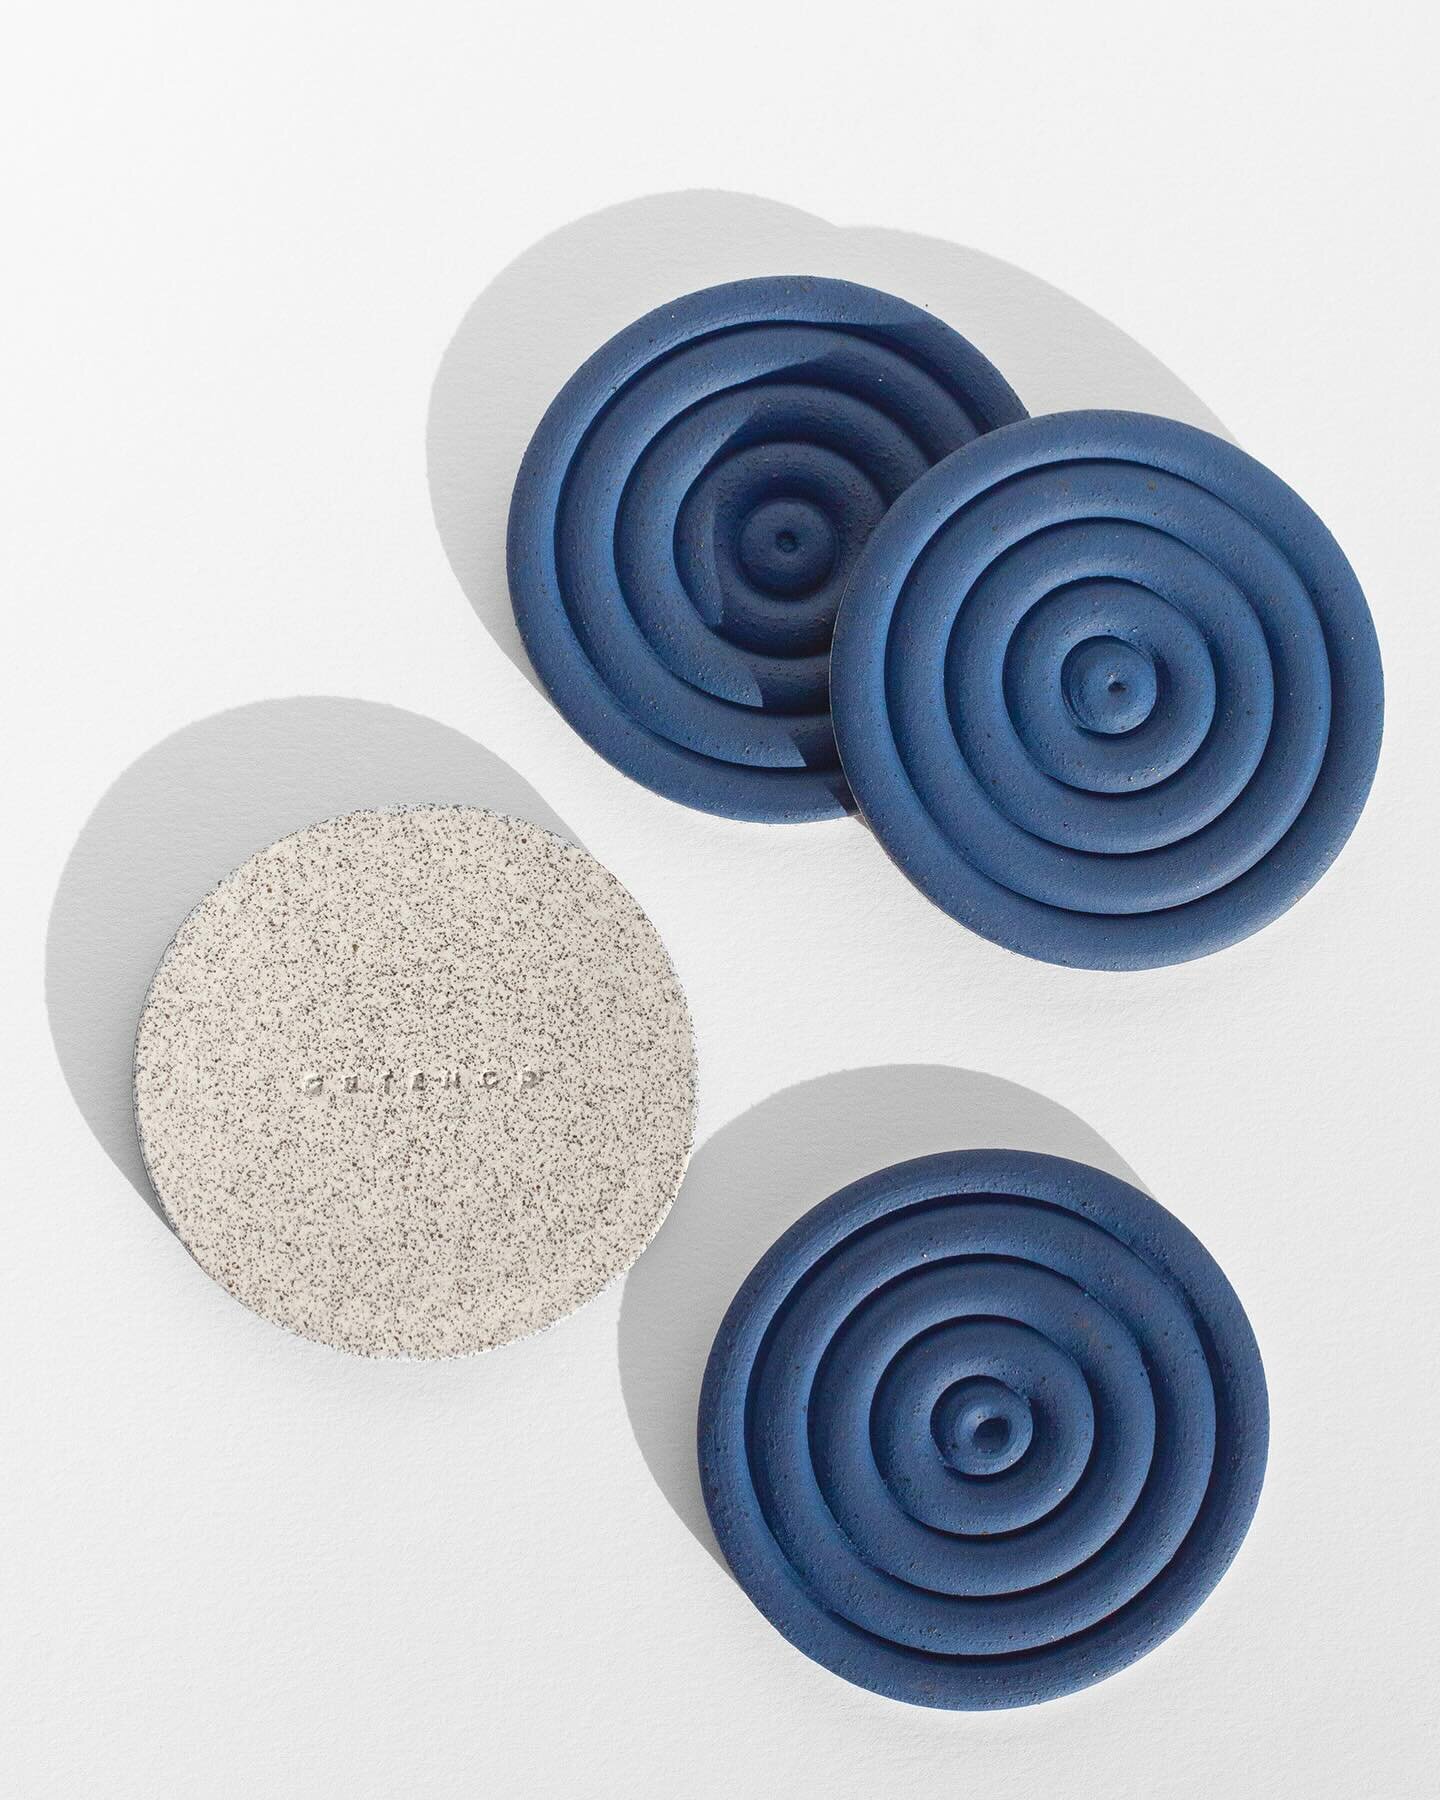 ORDER DEADLINE 12/18! I&rsquo;ve wrapped on production for the year but still have some great pieces for any last minute gifters! These new coasters are some personal favorites of my new designs and come in Cobalt, Forest and Natural Speckle. So pill